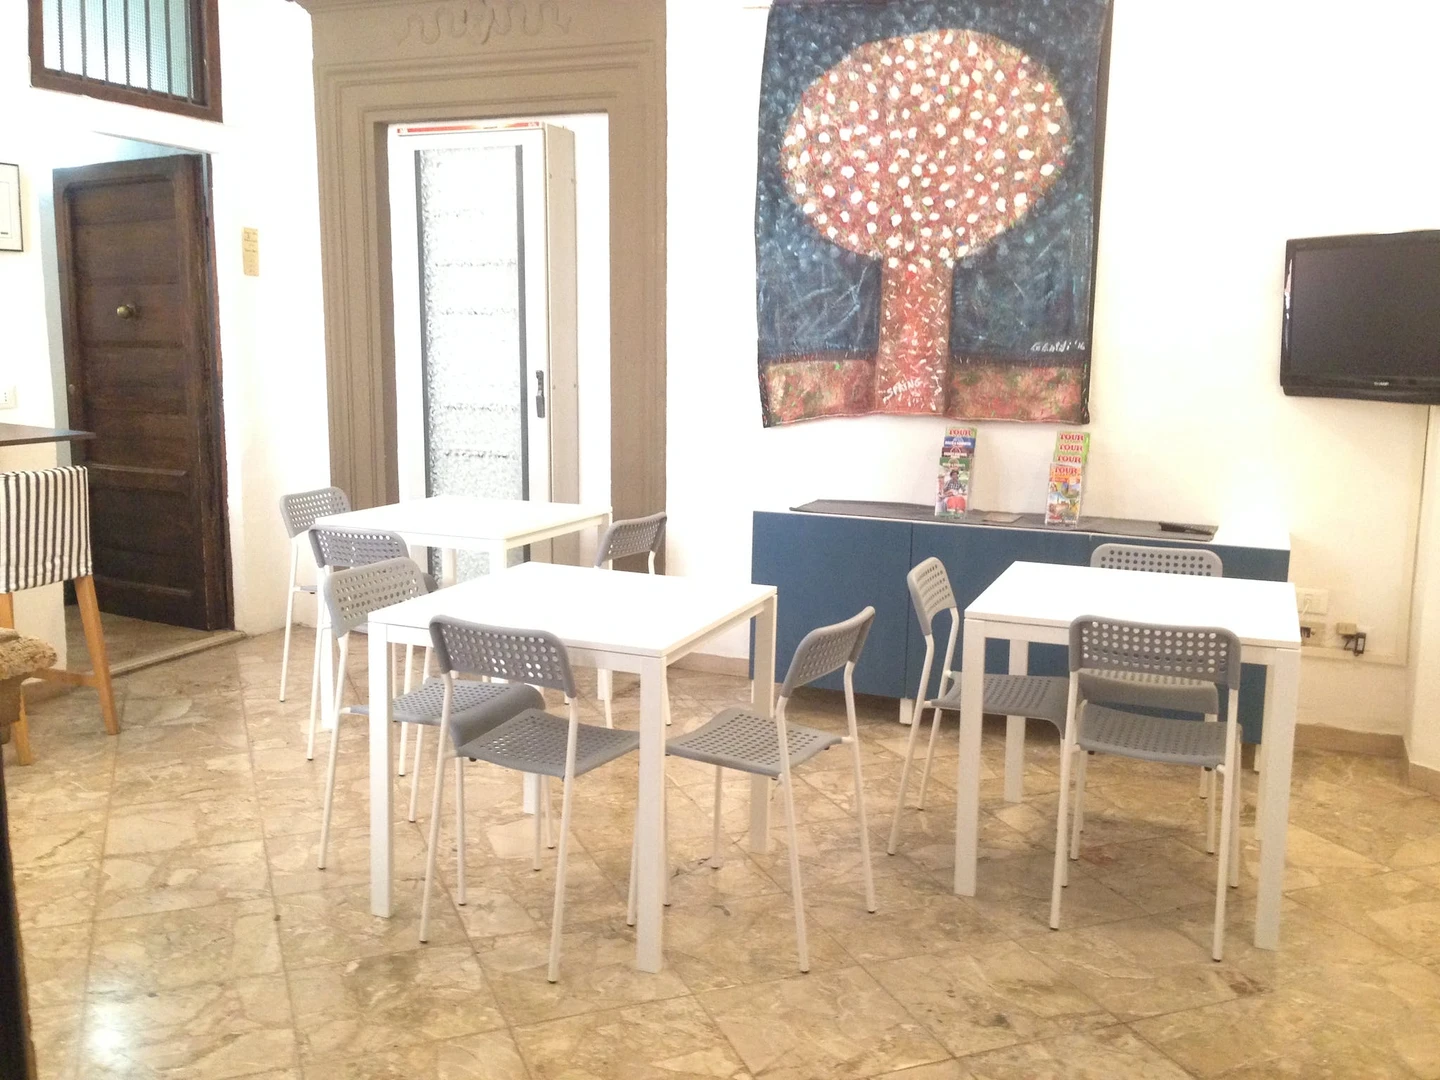 Bright shared room for rent in Siena